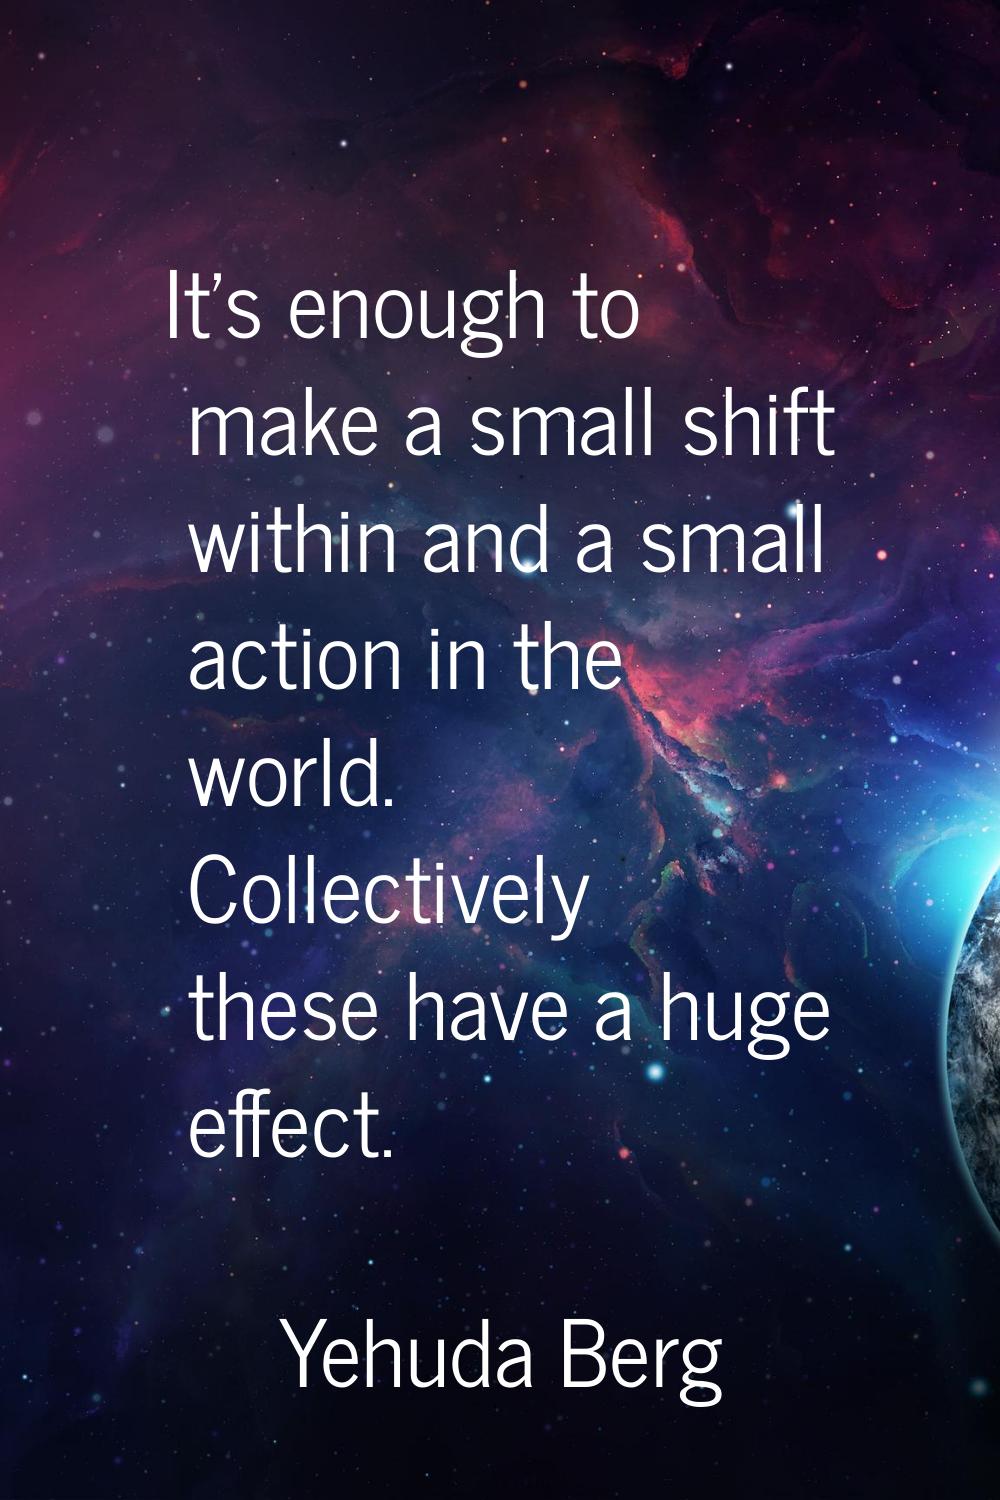 It's enough to make a small shift within and a small action in the world. Collectively these have a